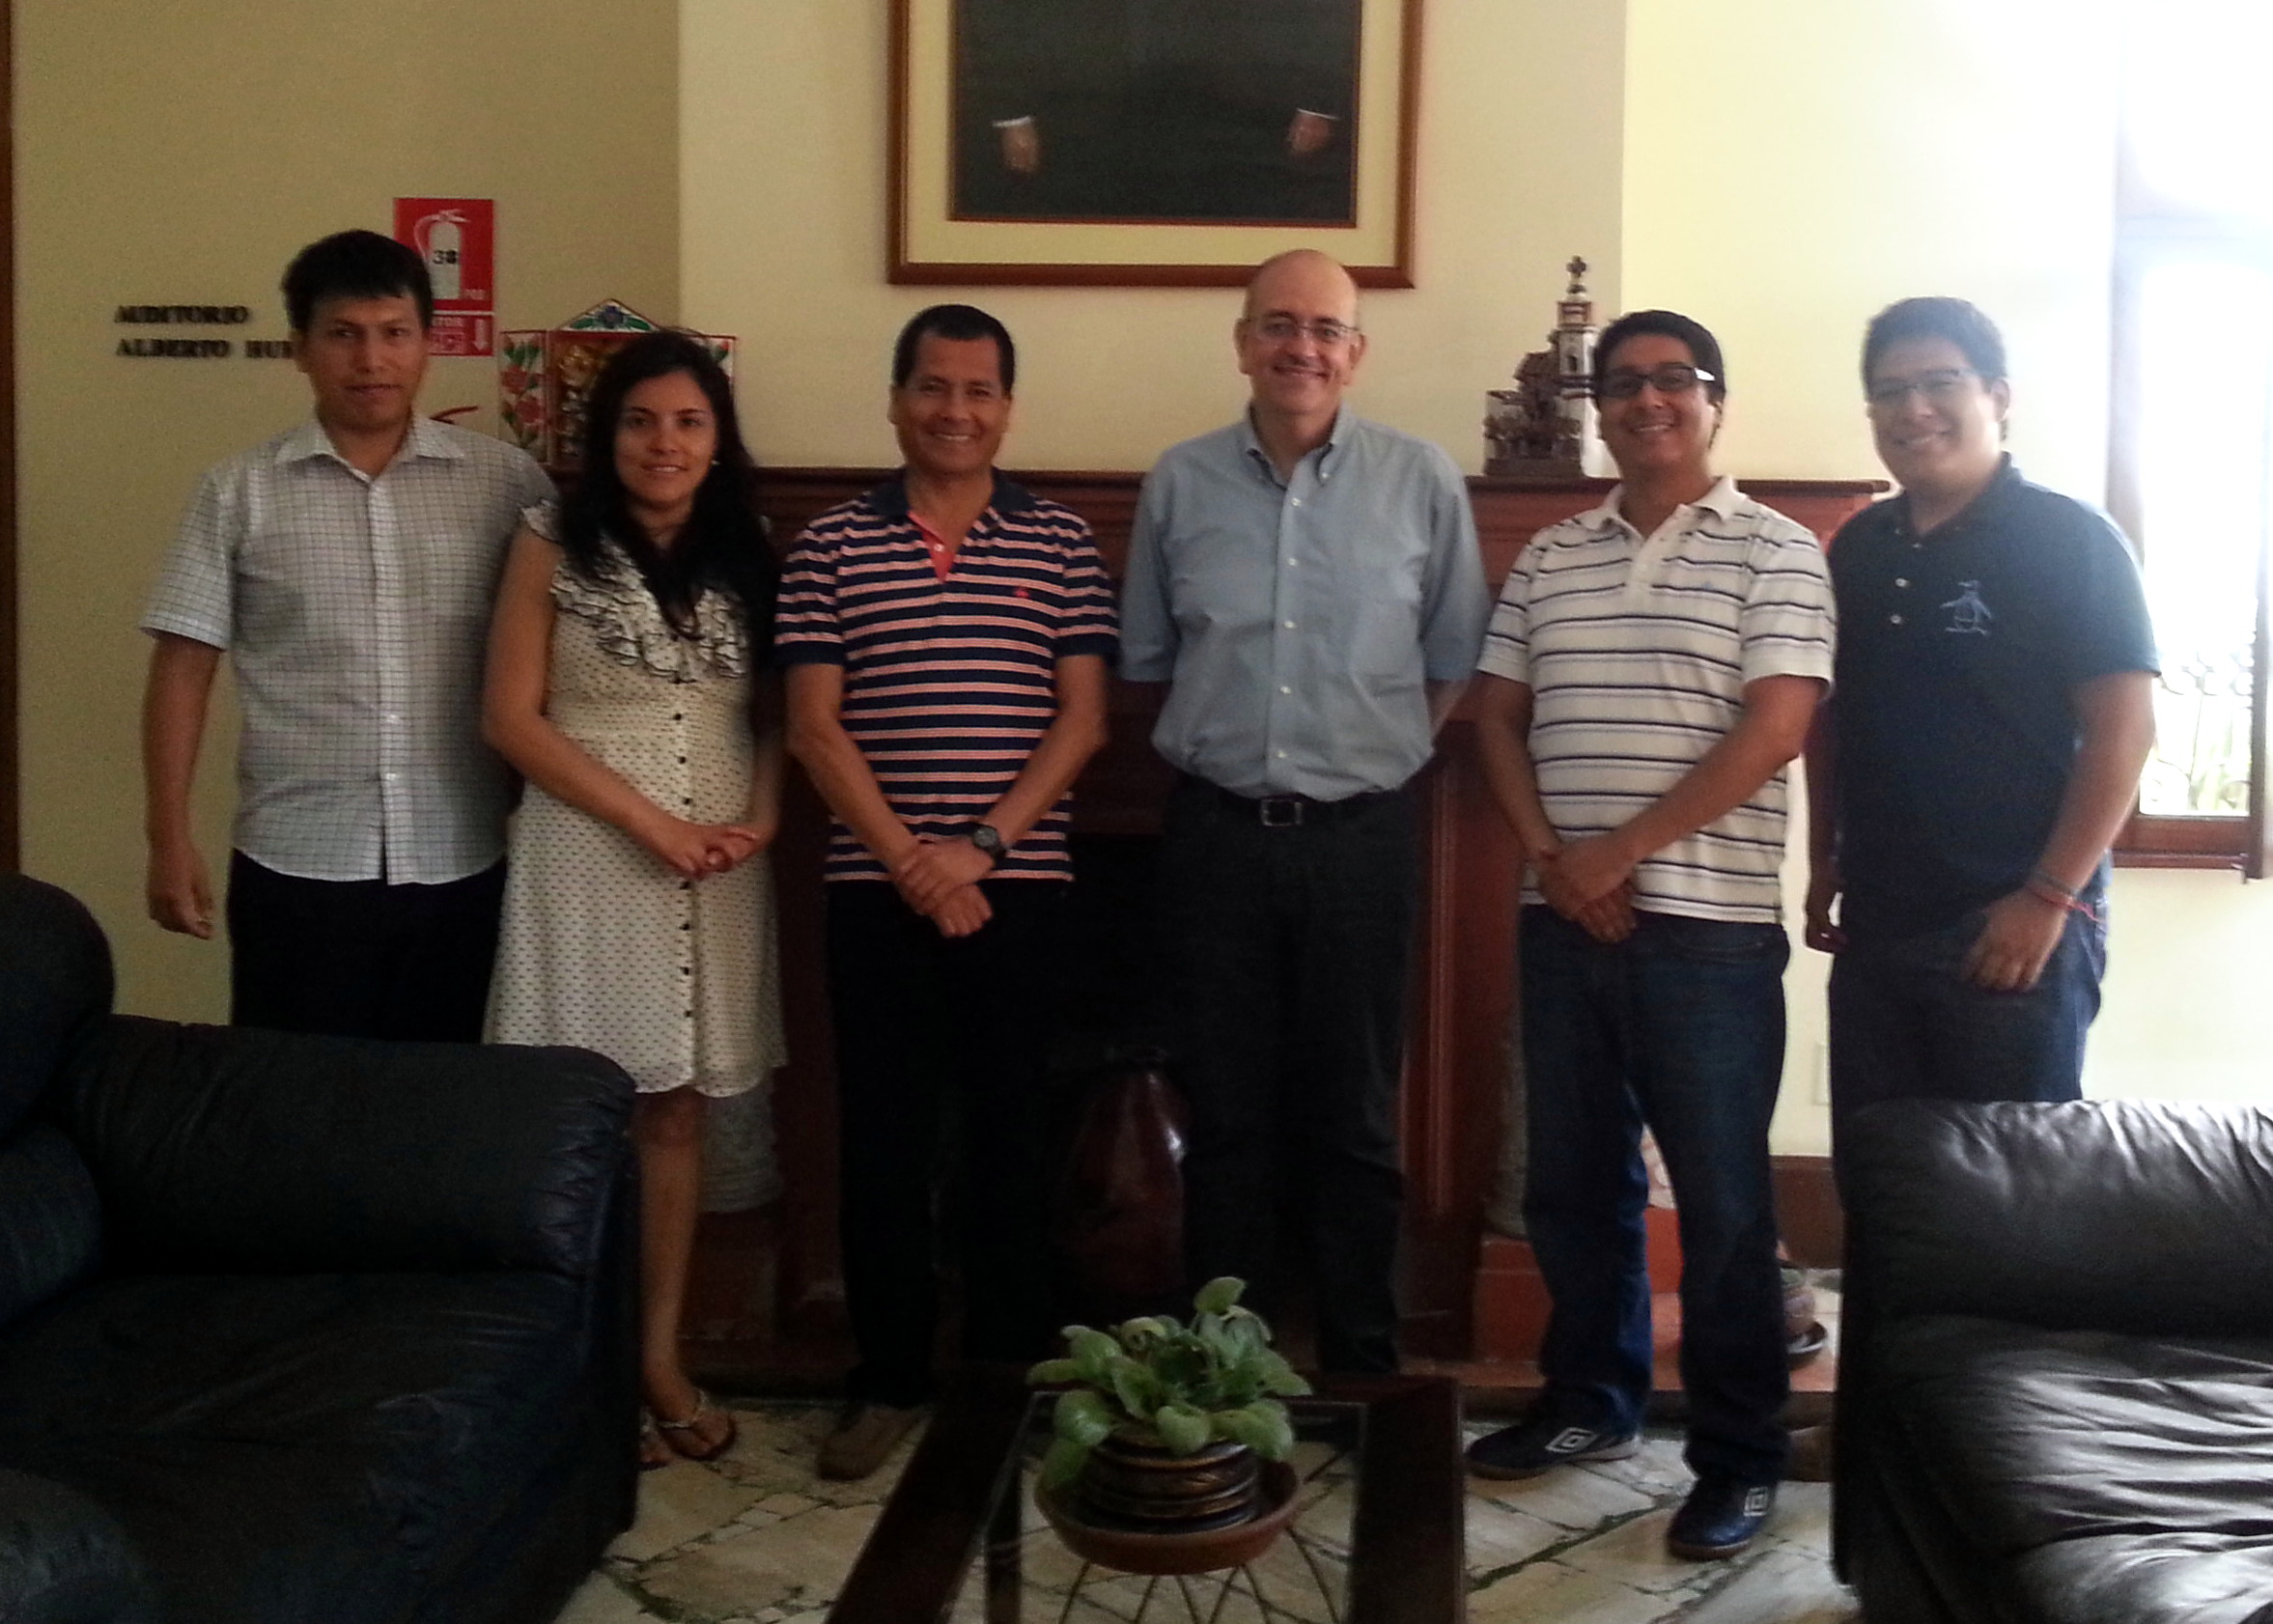 Aluisio Barros visits Peru to work on the Countdown case study